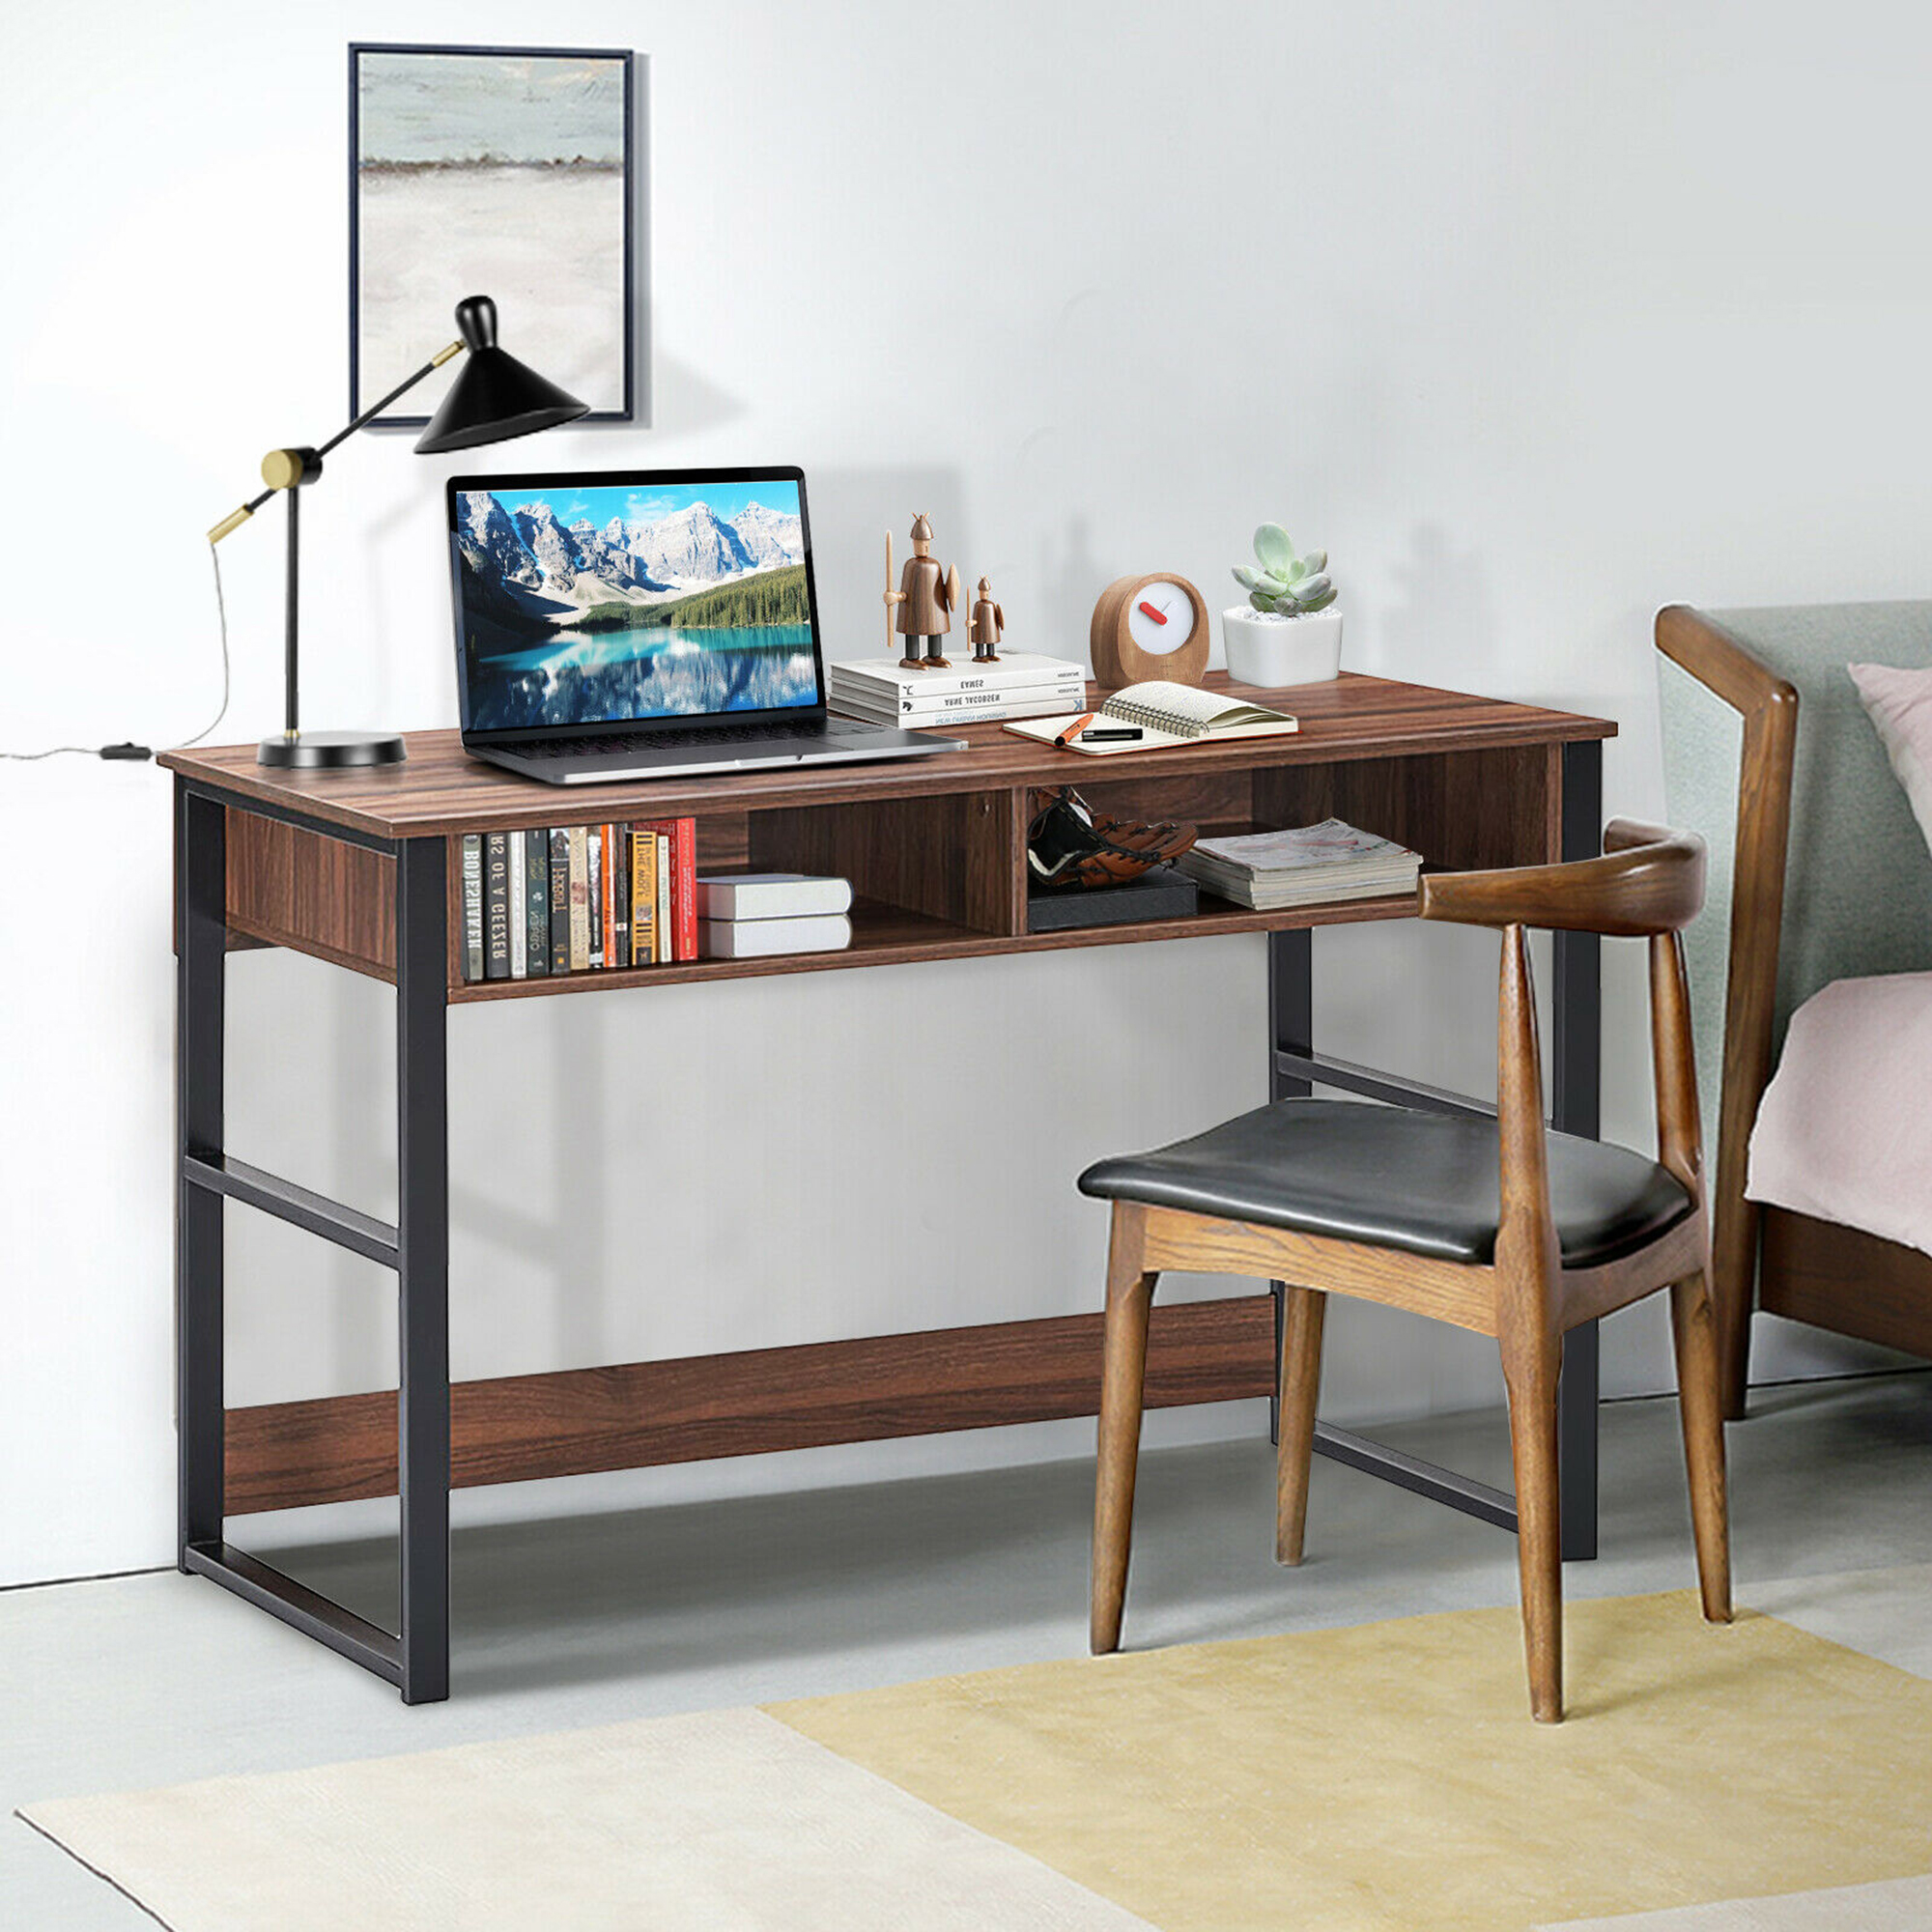 Gymax Home Office Computer Desk 2 Drawers Makeup Vanity Console Table Vintage